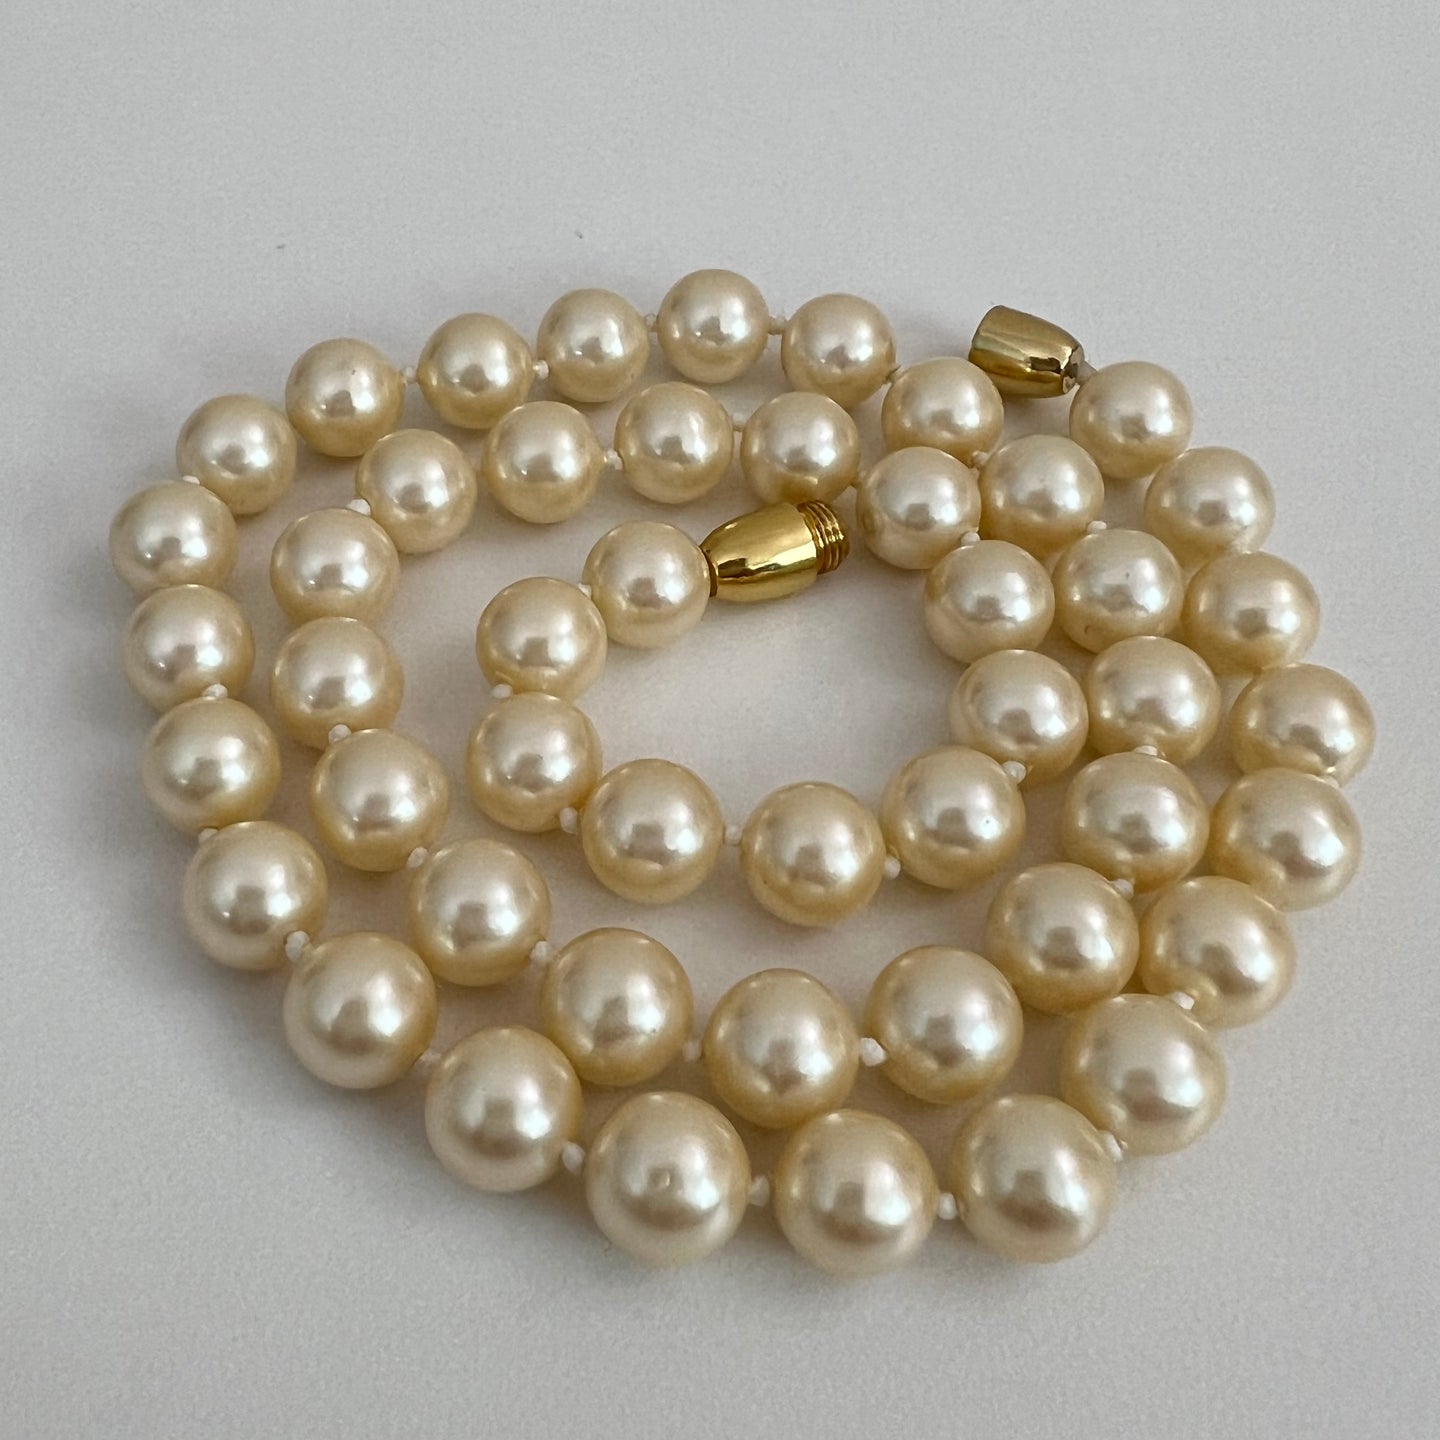 Vintage Costume Knotted Pearl Necklace with Gold Closure 17.5